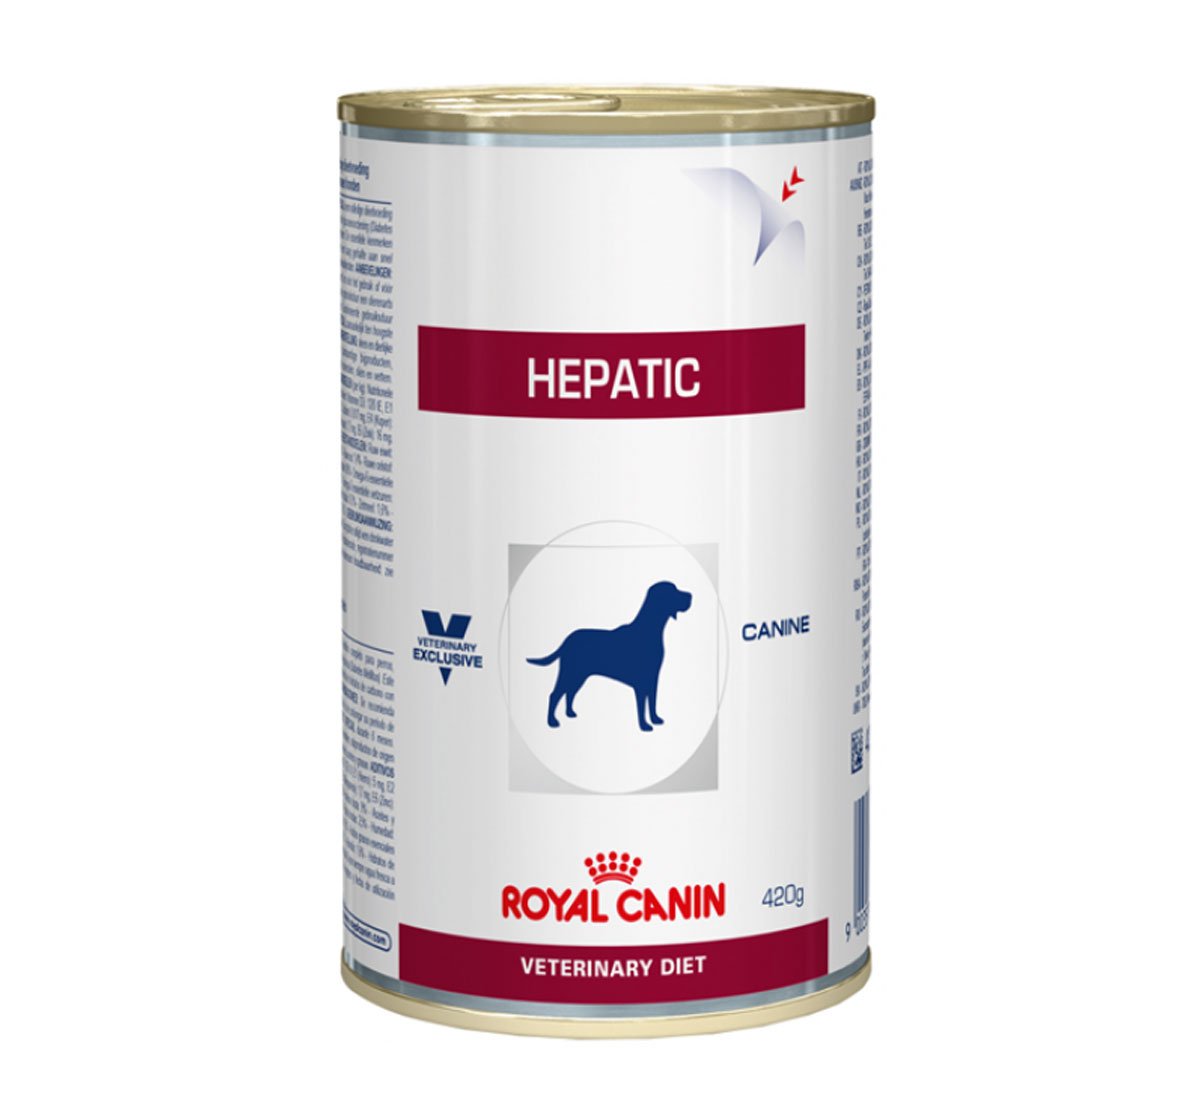 Royal Canin Veterinary Diet Hepatic Dog Canned Food